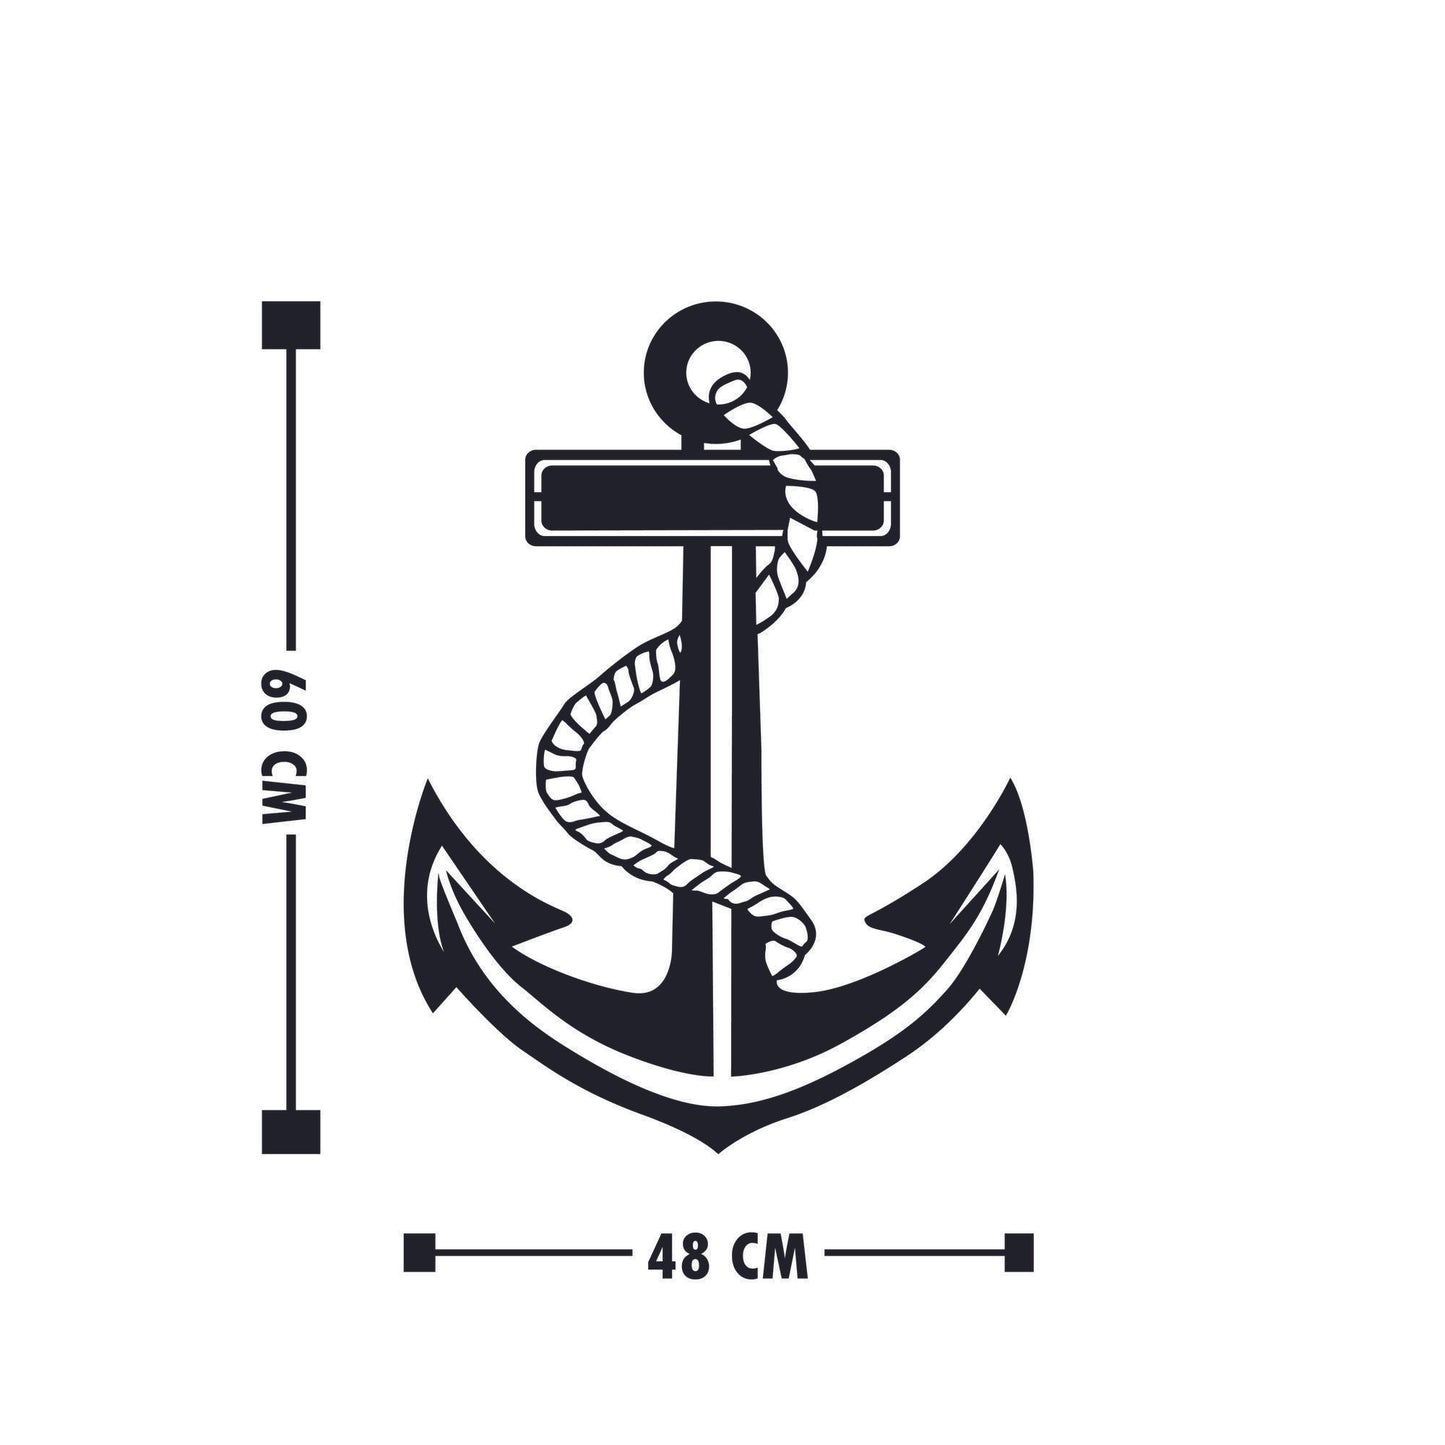 Anchor 3 - Decorative Metal Wall Accessory